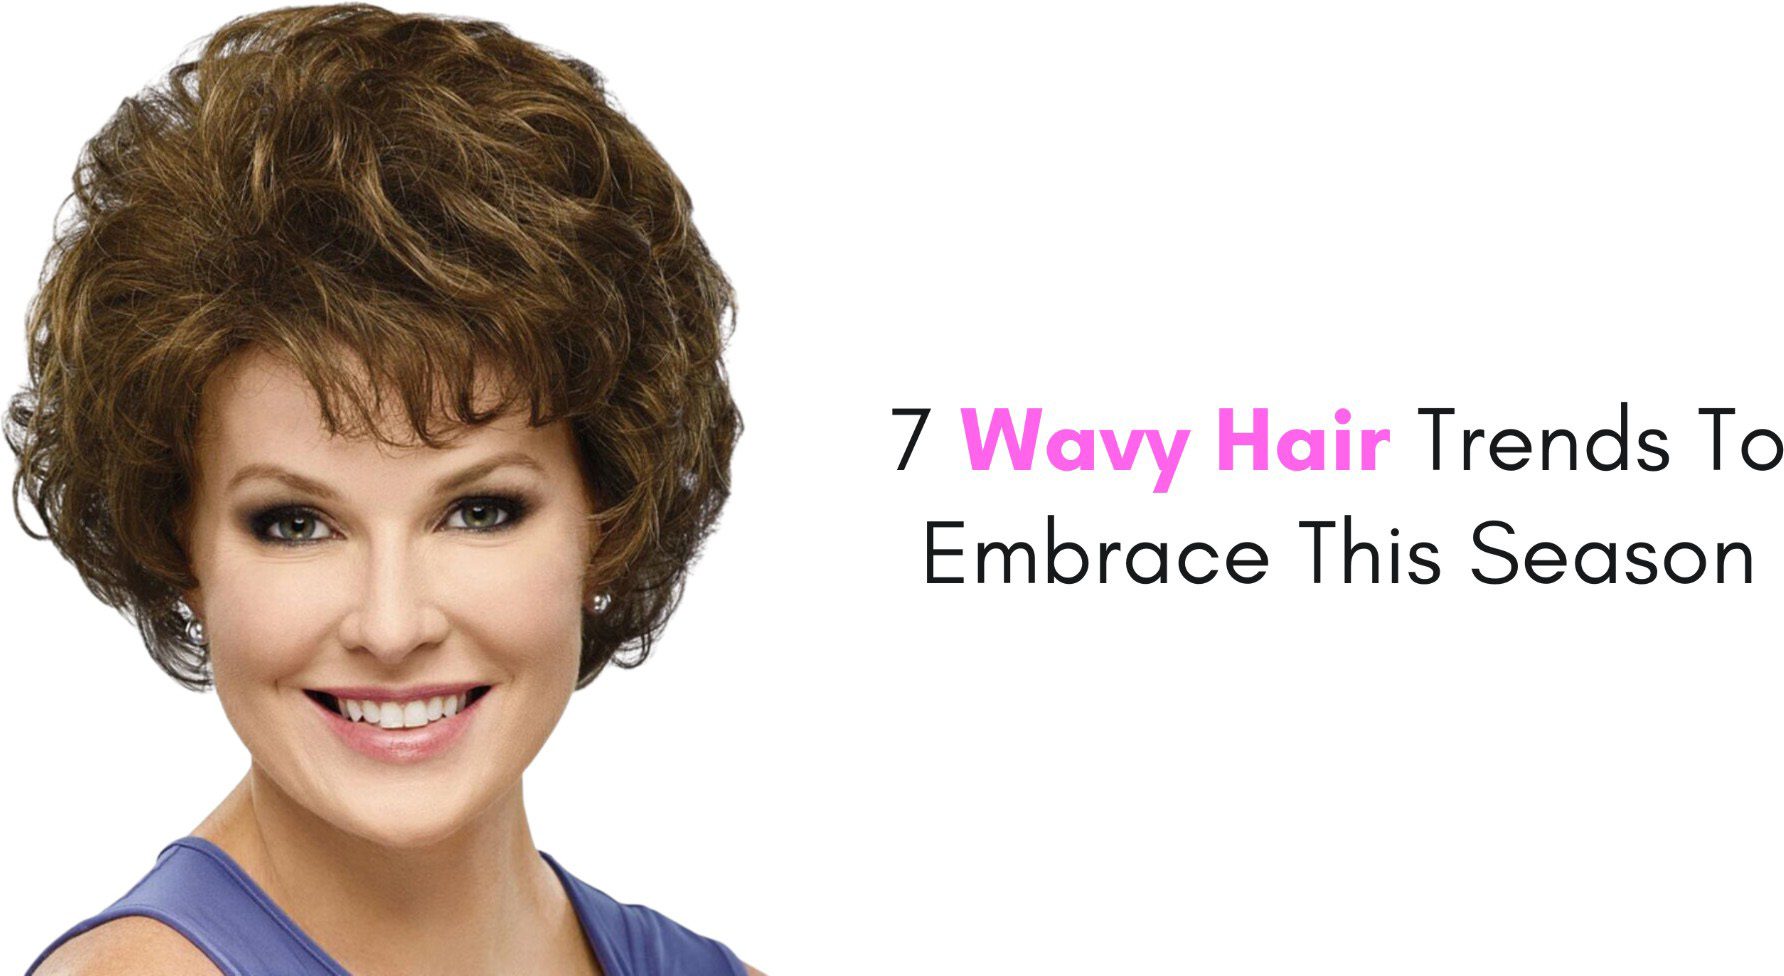 7 Wavy Hair Trends To Embrace This Season